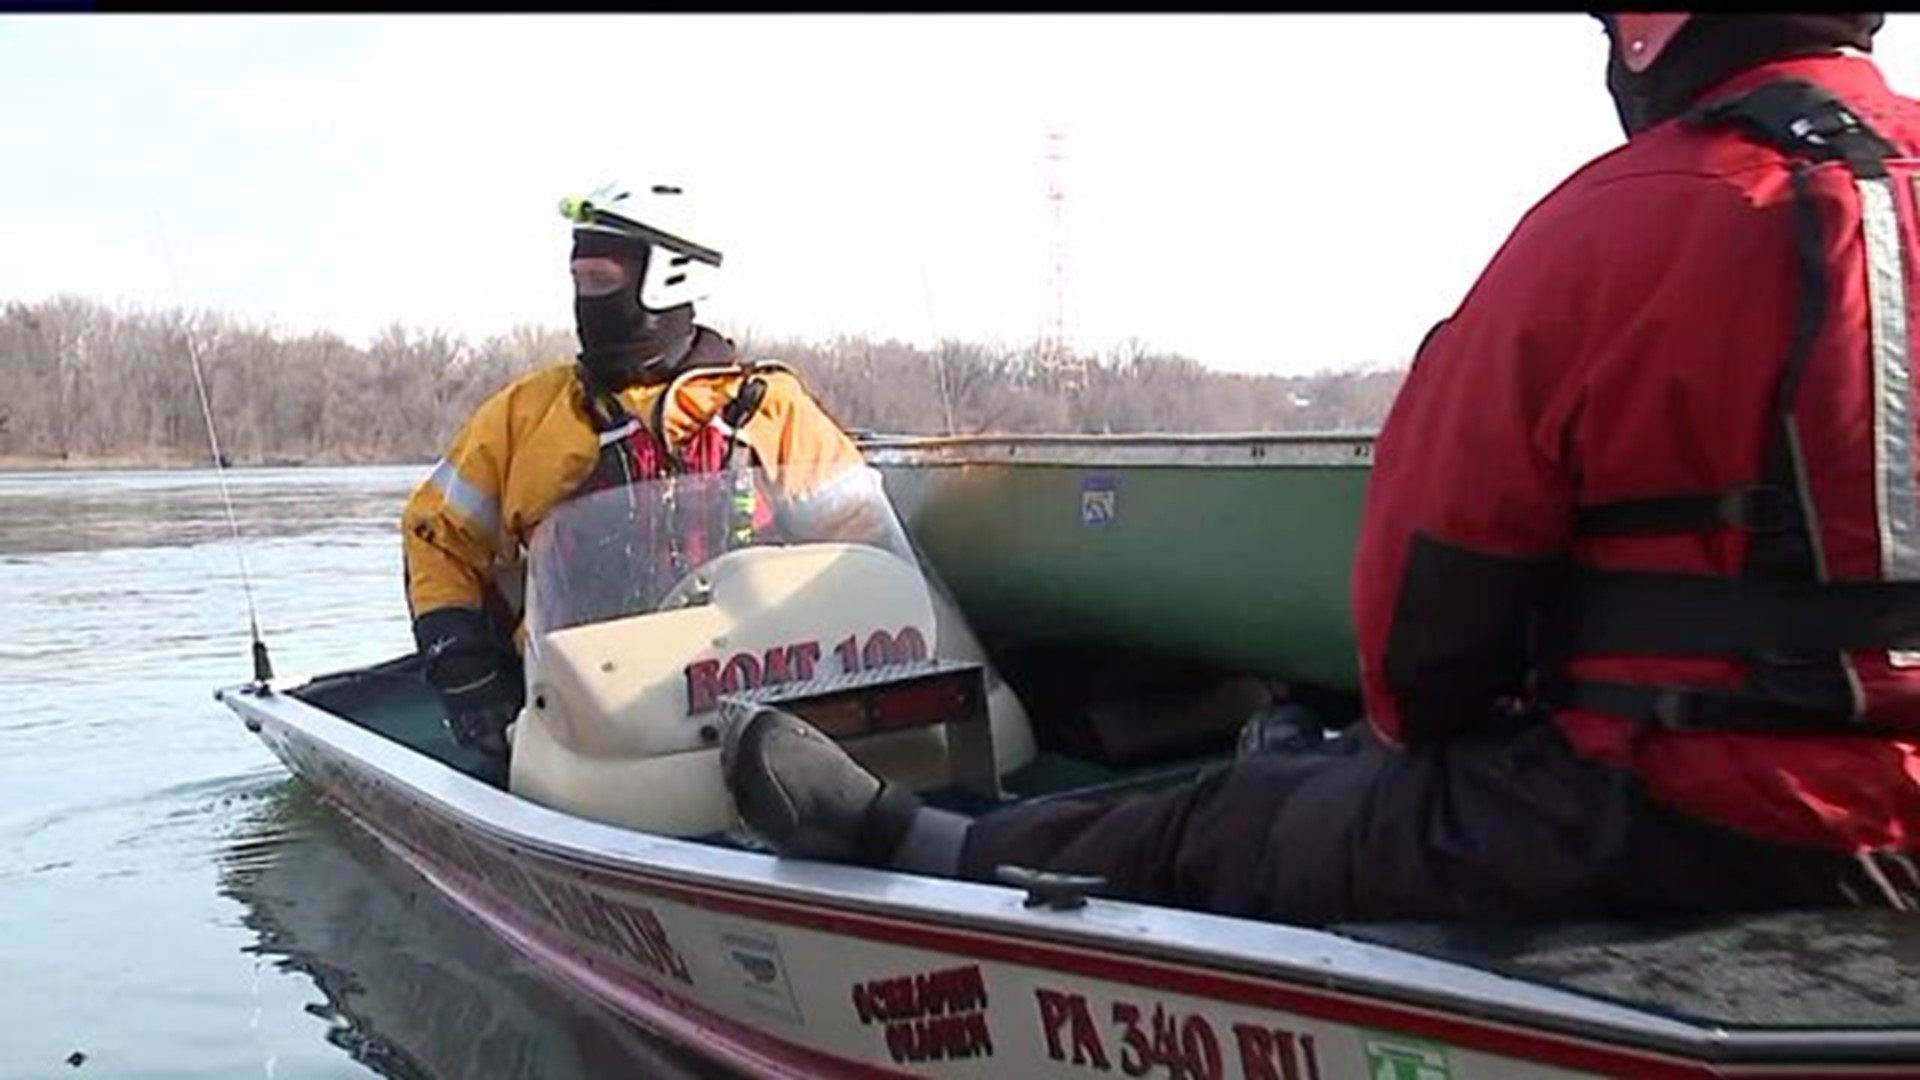 Search intensifies for missing teenager on Susquehanna River